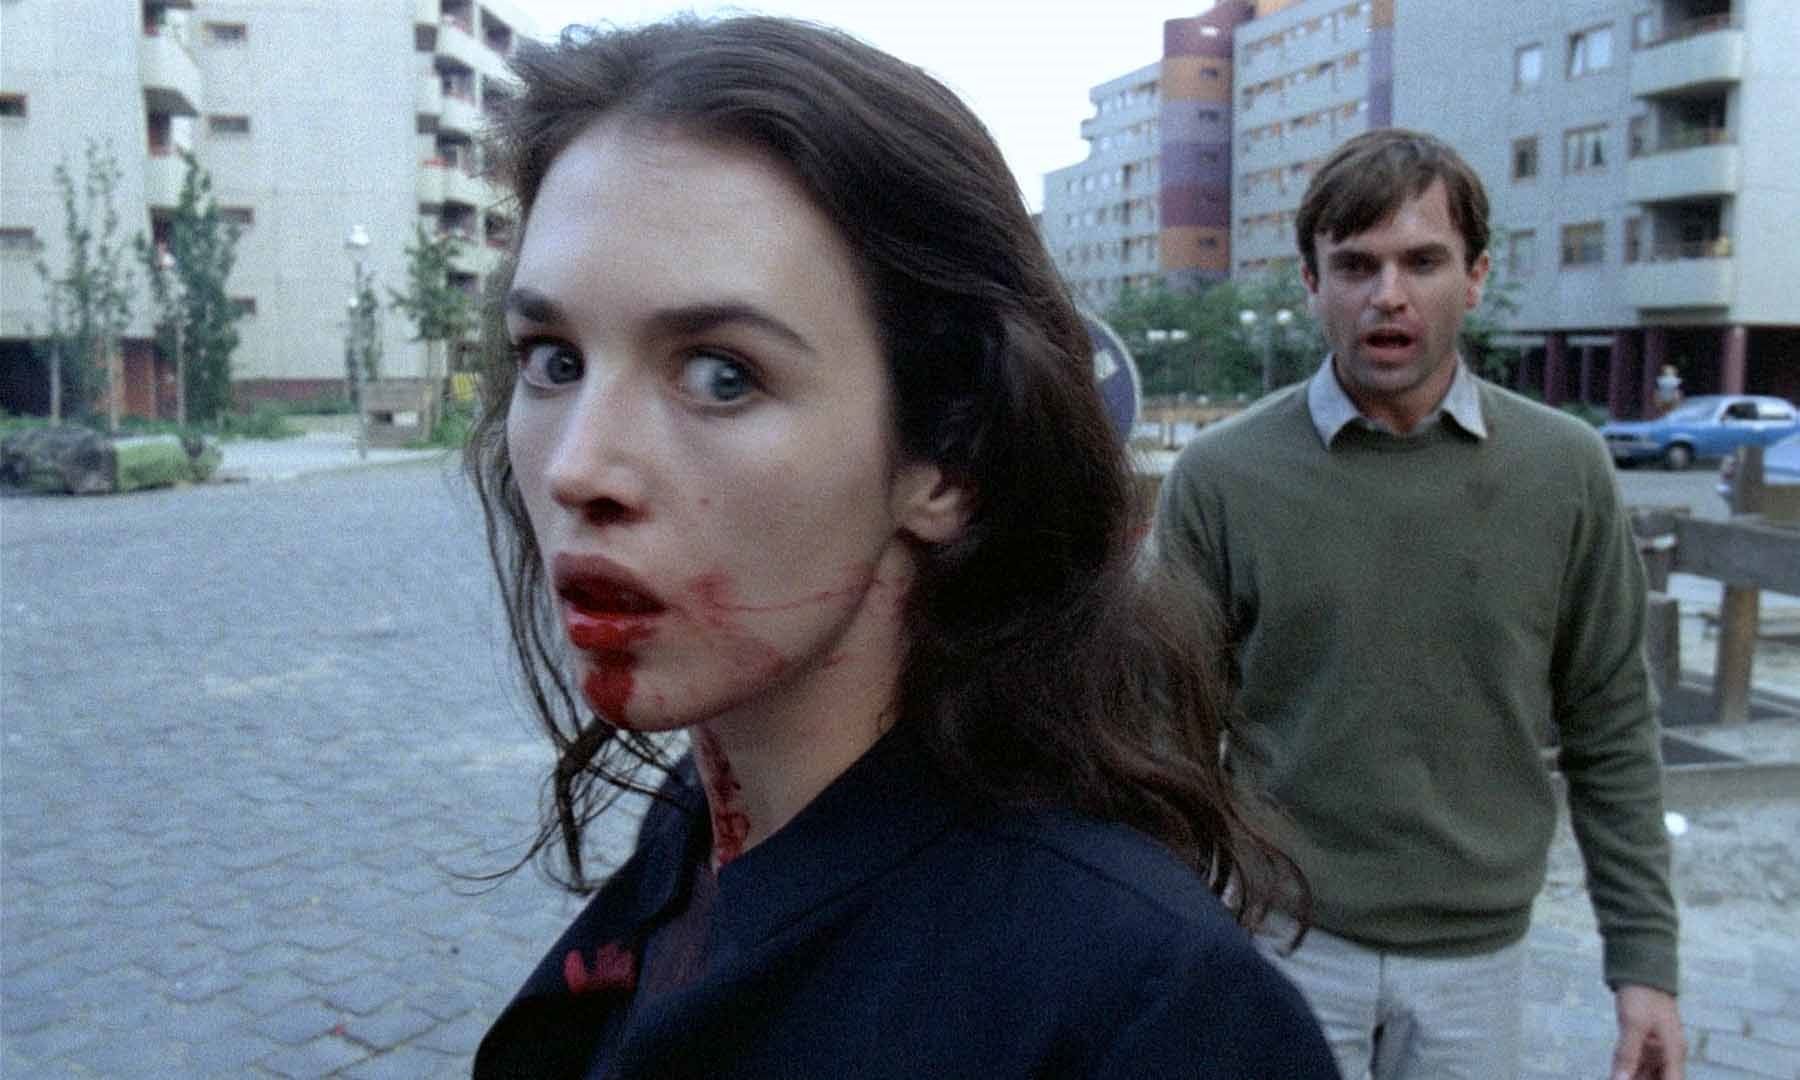 Isabelle Adjani with blood coming out of her mouth, and Sam Neill standing behind her, both looking distressed, in Possession.